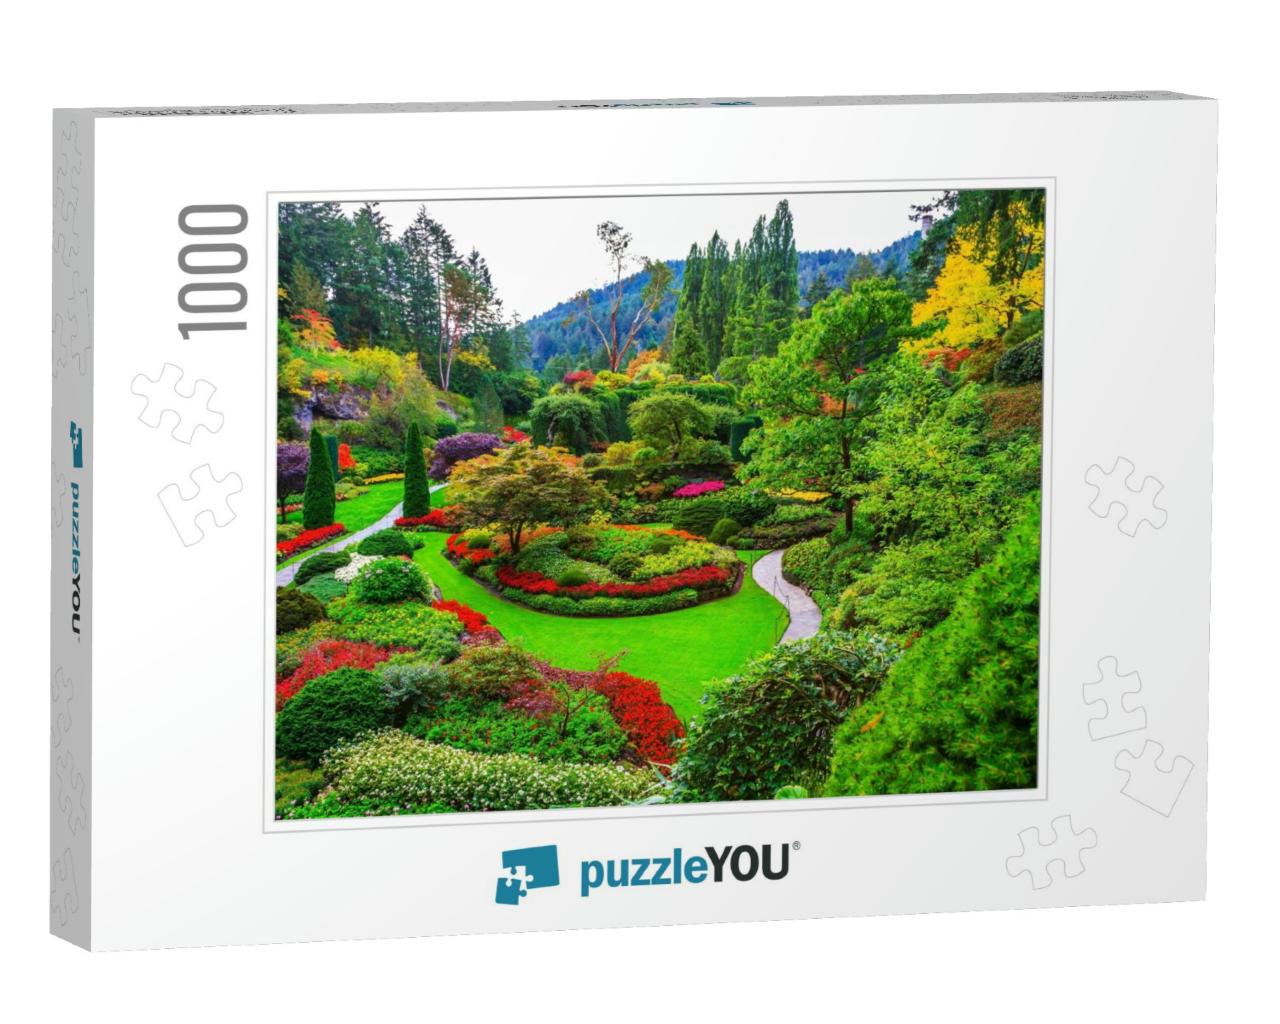 Butchart Gardens - Gardens on Vancouver Island. Flower Be... Jigsaw Puzzle with 1000 pieces